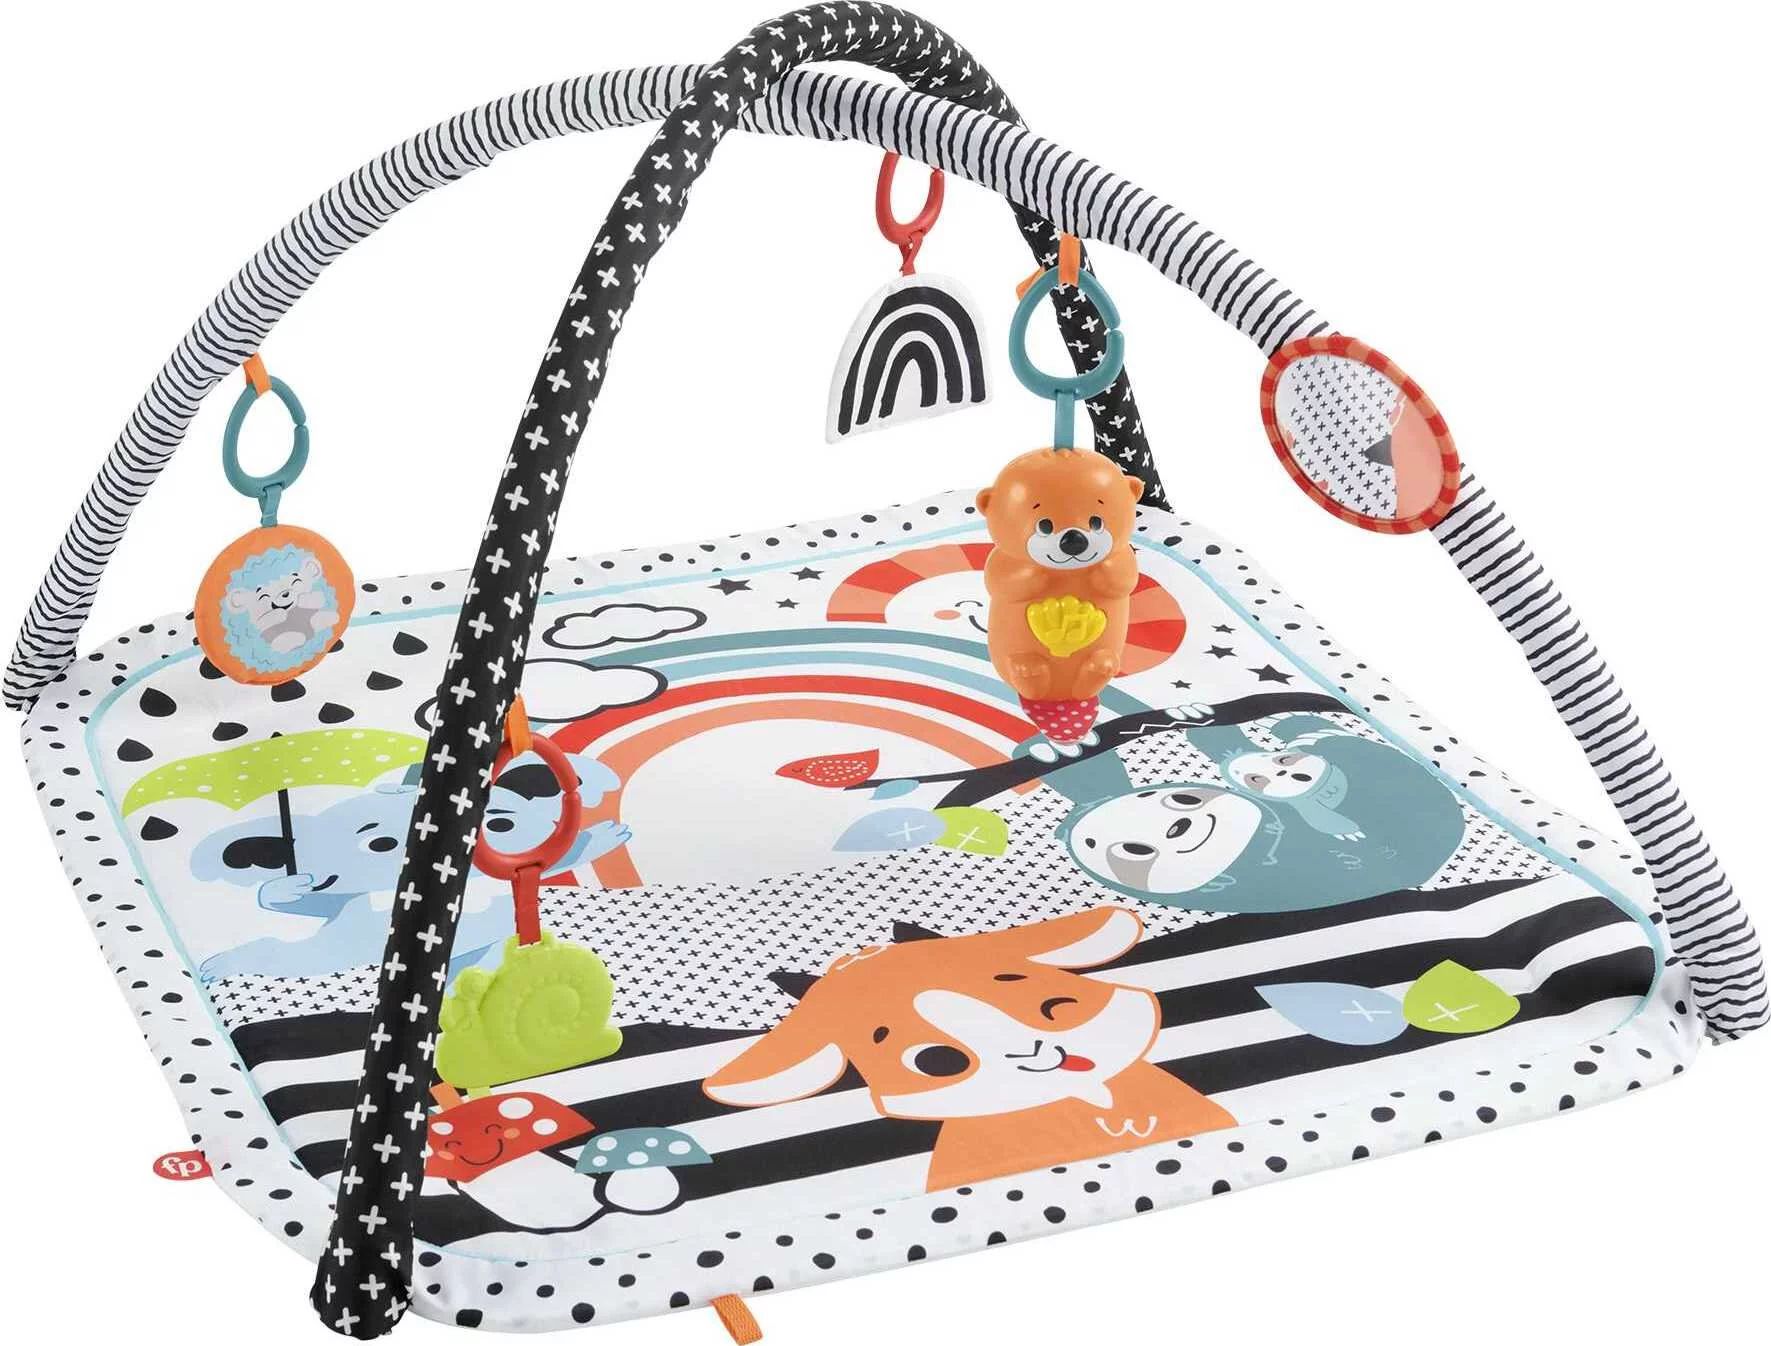 Fisher-Price 3-in-1 Music Glow and Grow Gym Infant Playmat with Lights & Removable Toys | Walmart (US)